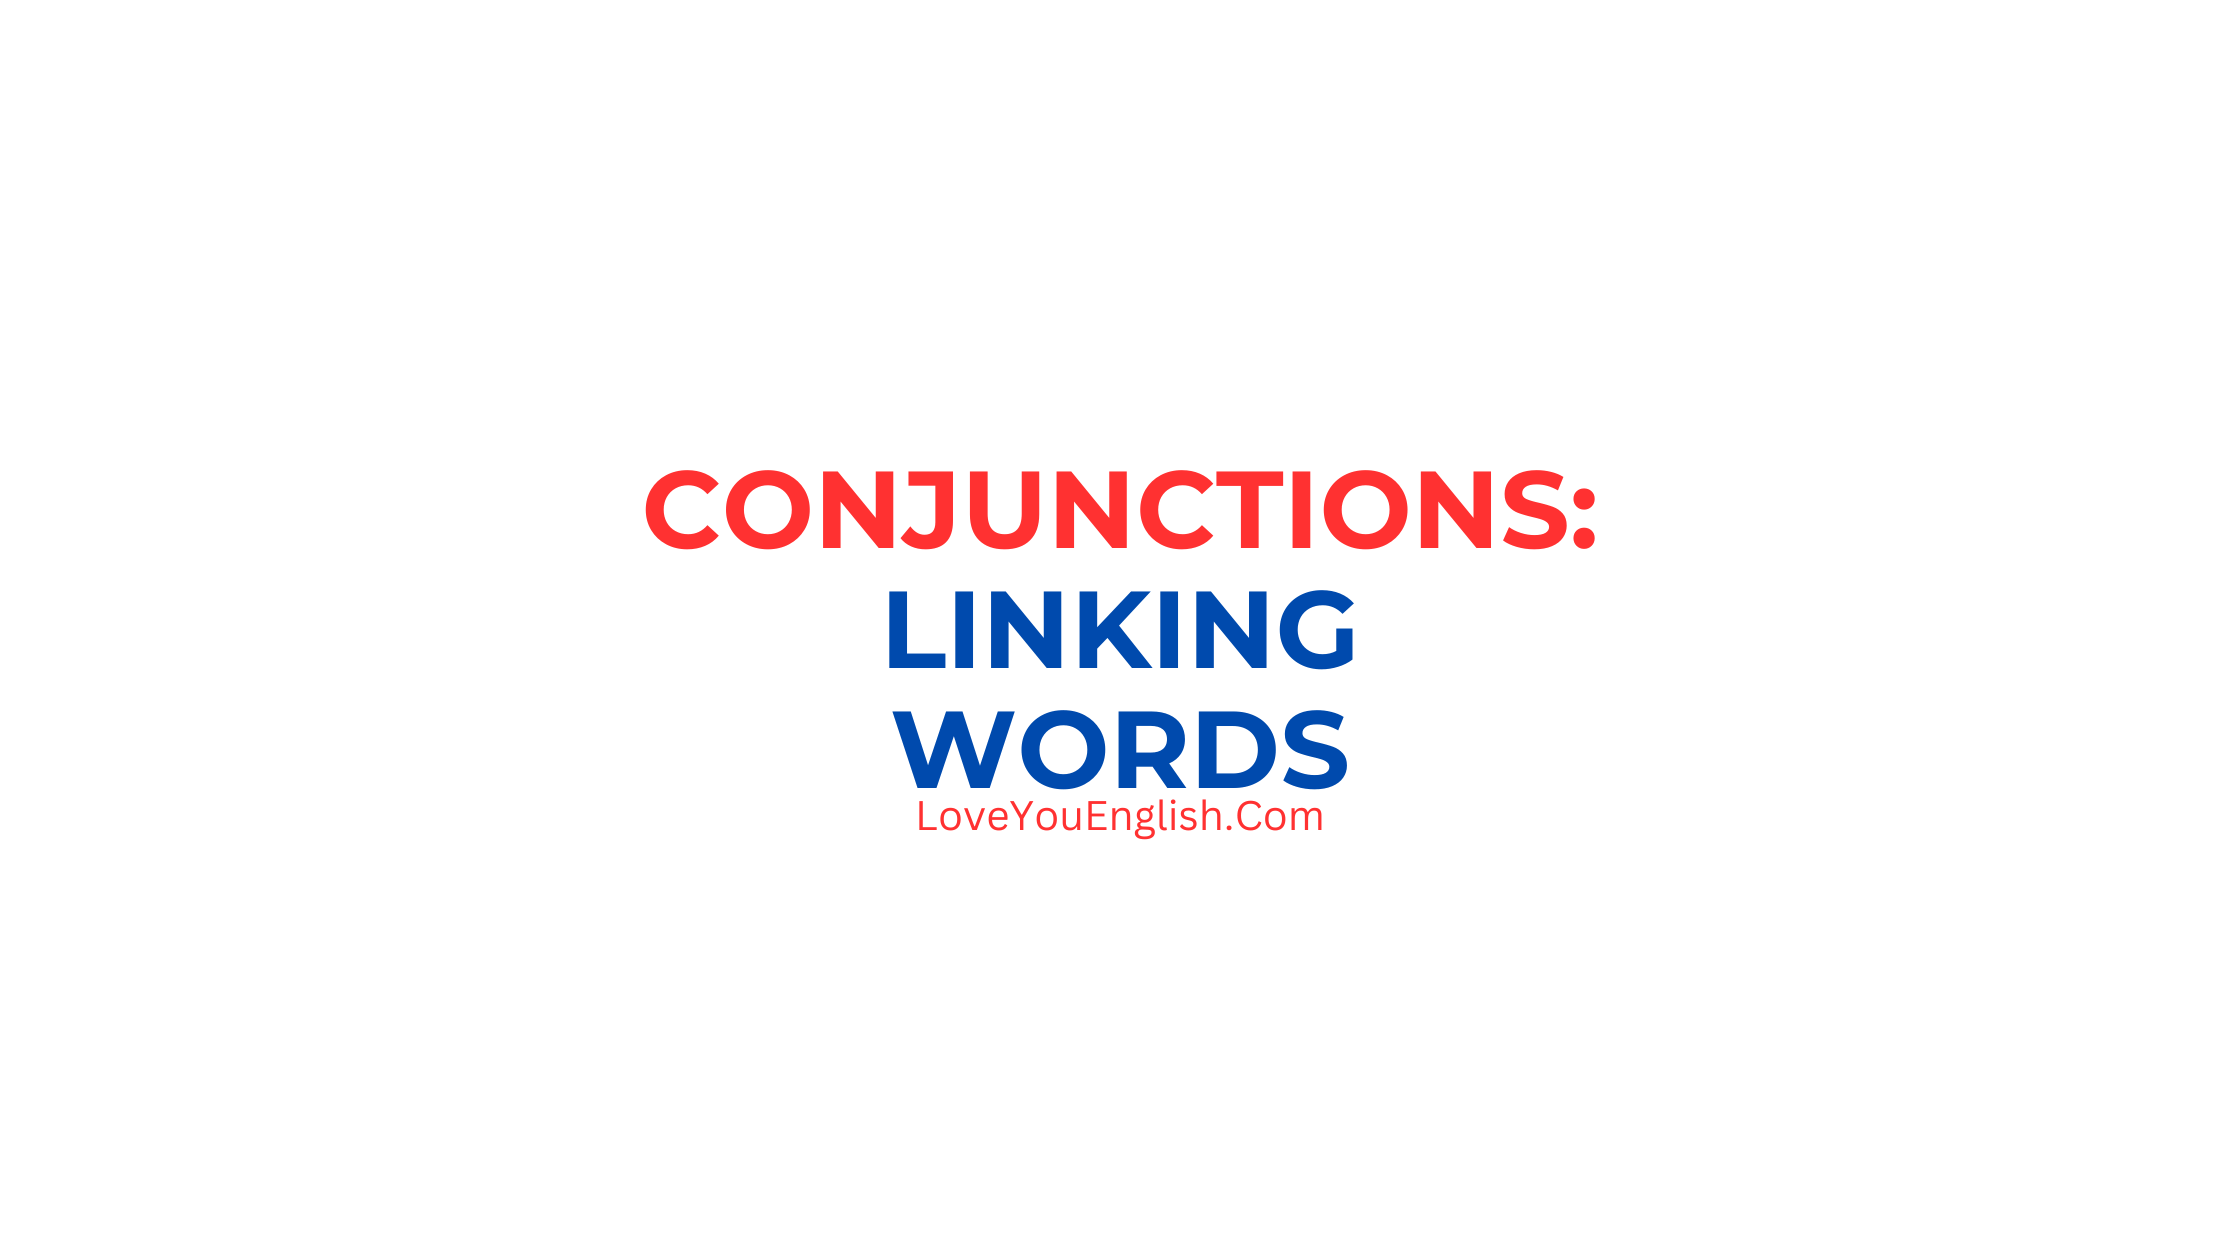 Conjunctions: Linking Words for Powerful Sentences